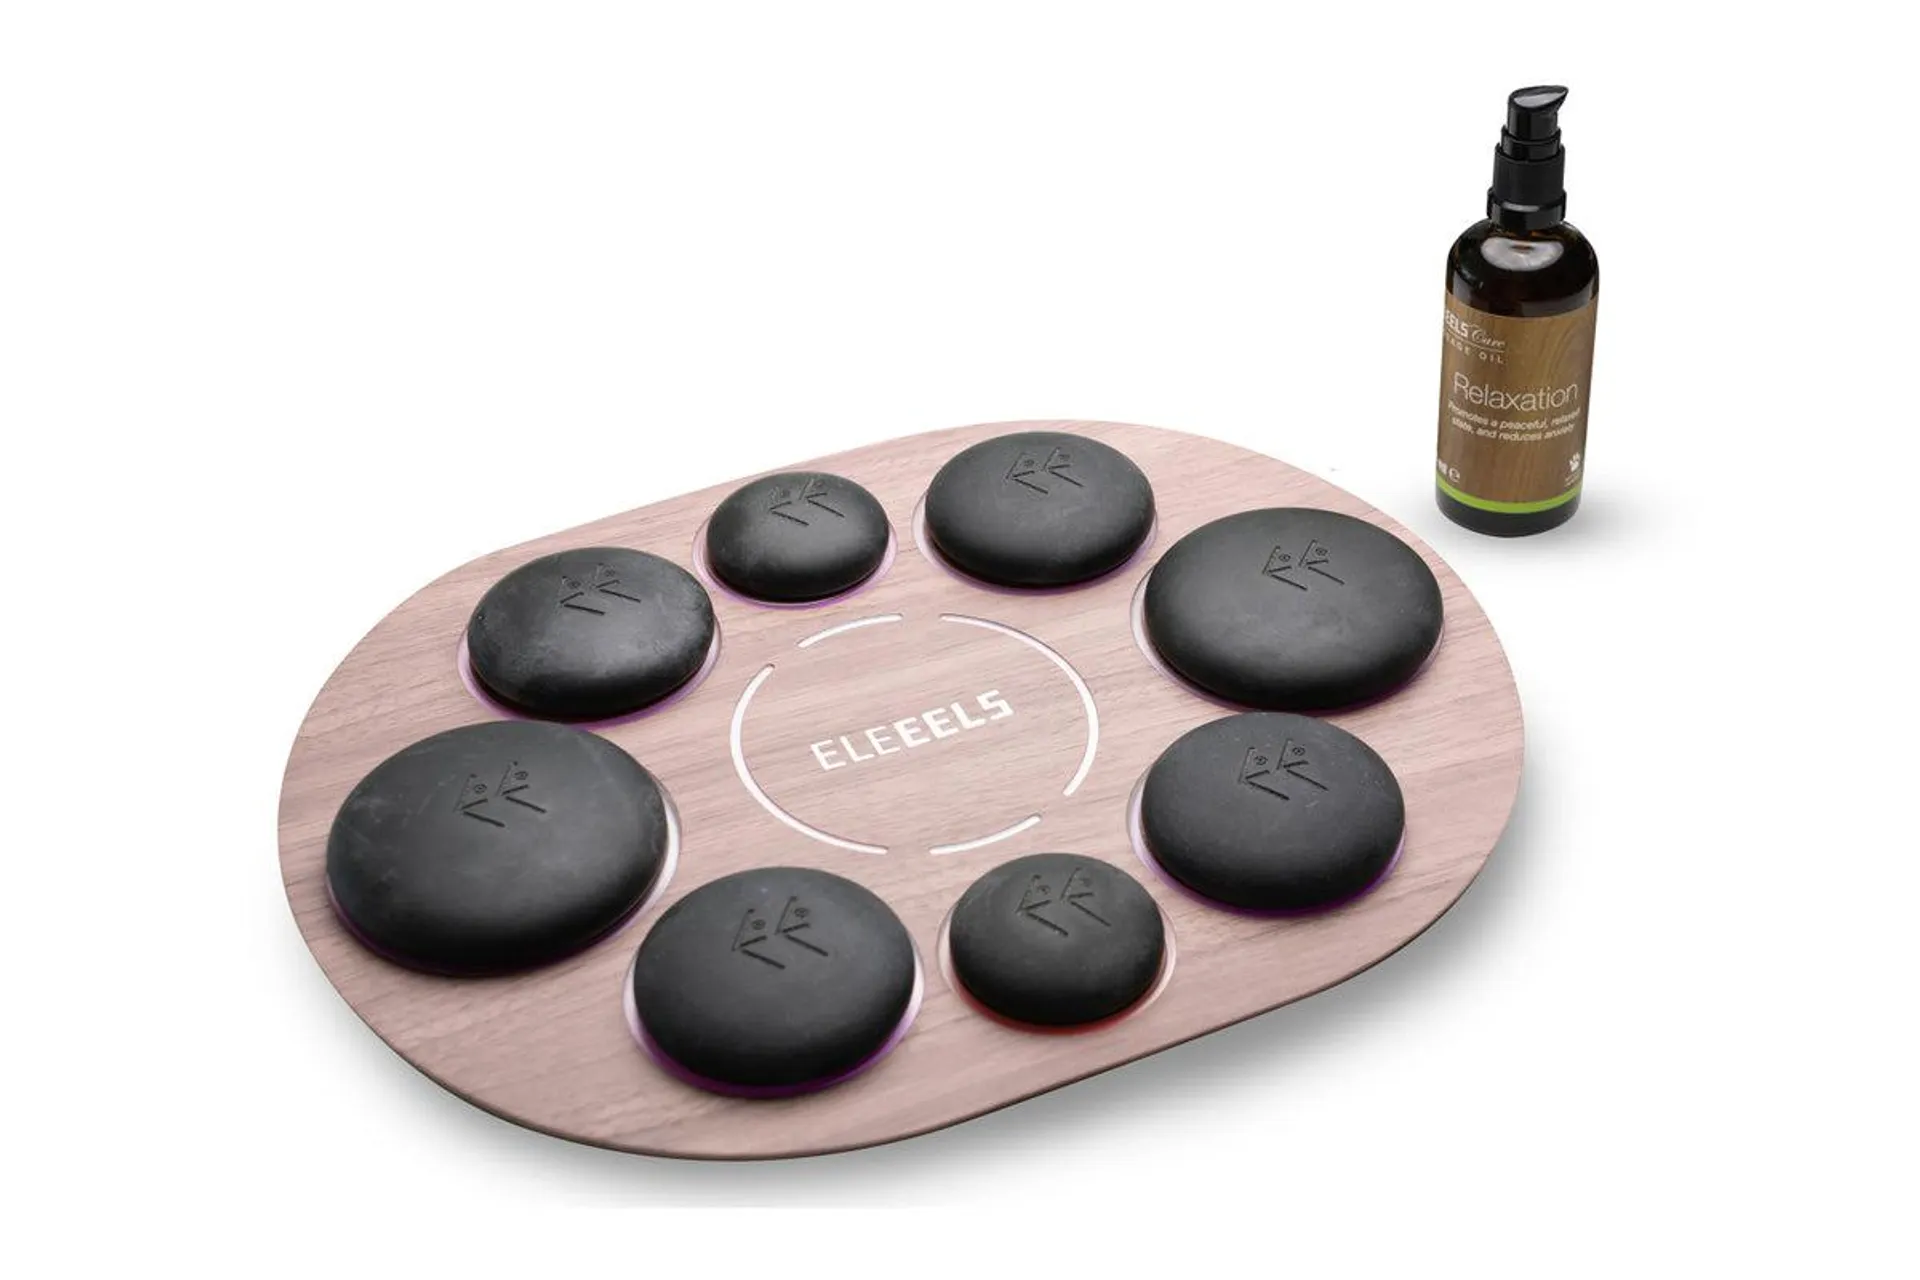 Eleeels S1 Revival Hot Massage Stones Spa Collection Kit